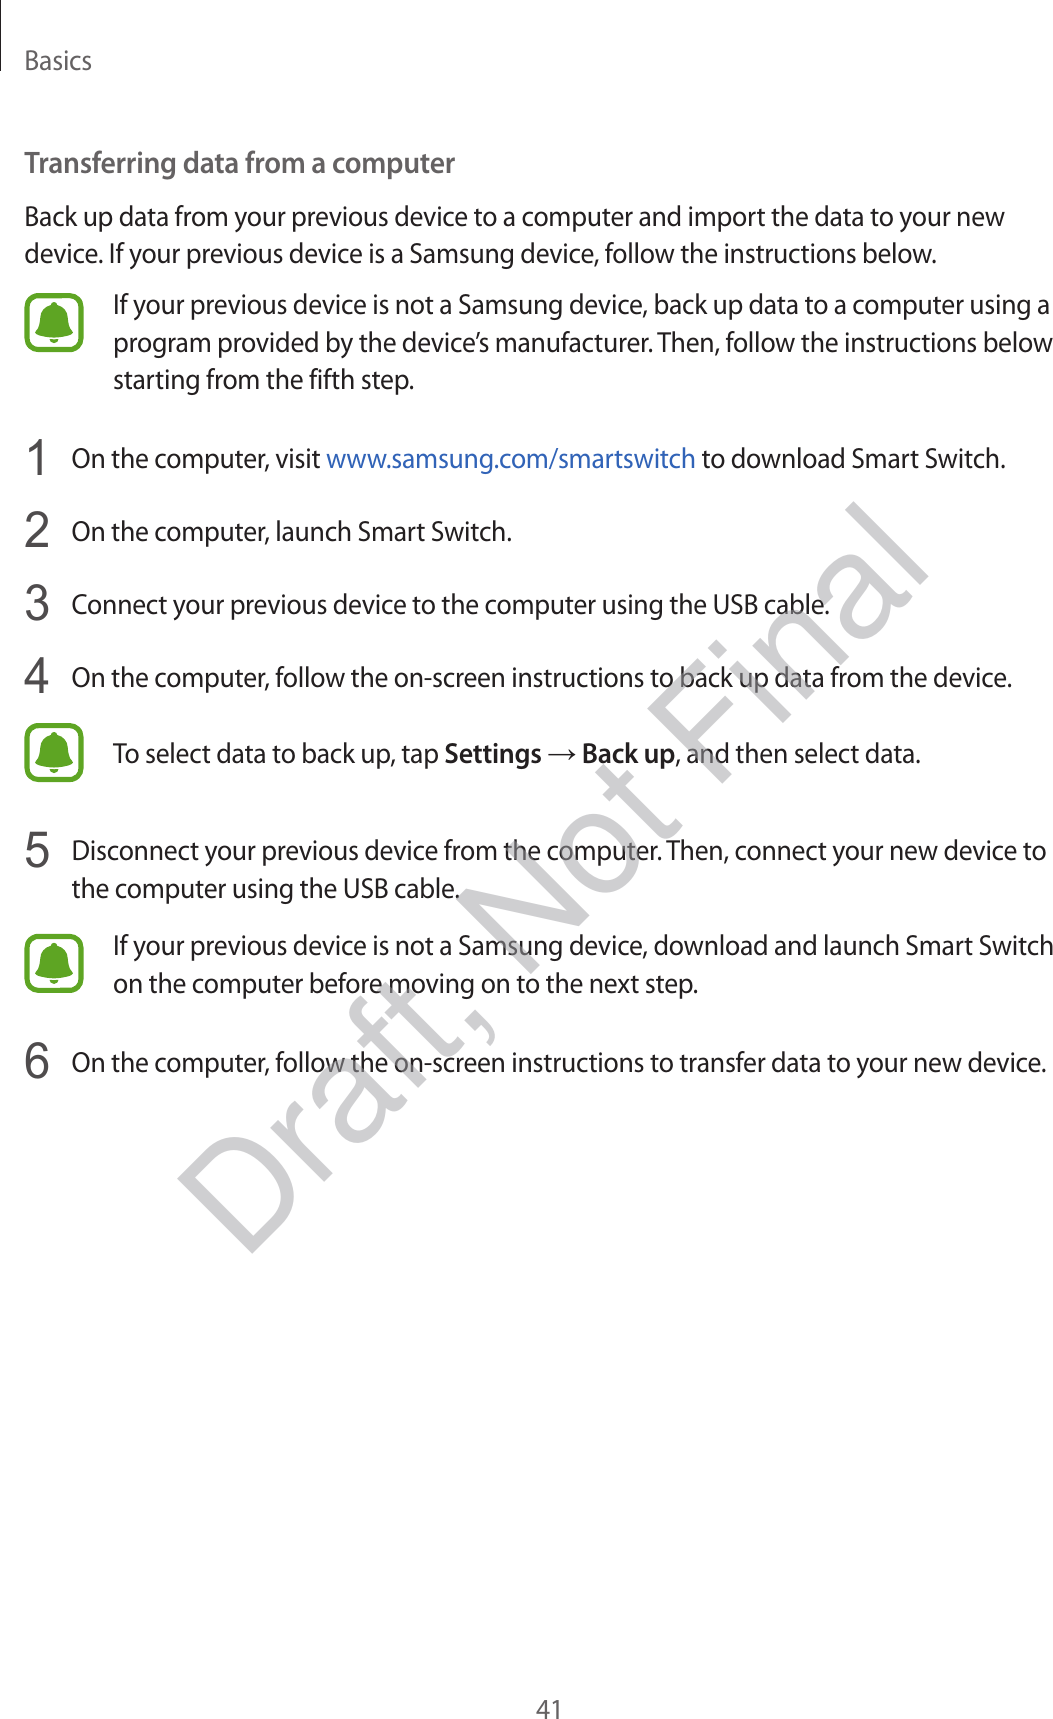 Basics41Transferring data from a computerBack up data from your previous device to a computer and import the data to your new device. If your previous device is a Samsung device, follow the instructions below.If your previous device is not a Samsung device, back up data to a computer using a program provided by the device’s manufacturer. Then, follow the instructions below starting from the fifth step.1  On the computer, visit www.samsung.com/smartswitch to download Smart Switch.2  On the computer, launch Smart Switch.3  Connect your previous device to the computer using the USB cable.4  On the computer, follow the on-screen instructions to back up data from the device.To select data to back up, tap Settings → Back up, and then select data.5  Disconnect your previous device from the computer. Then, connect your new device to the computer using the USB cable.If your previous device is not a Samsung device, download and launch Smart Switch on the computer before moving on to the next step.6  On the computer, follow the on-screen instructions to transfer data to your new device.Draft, Not Final